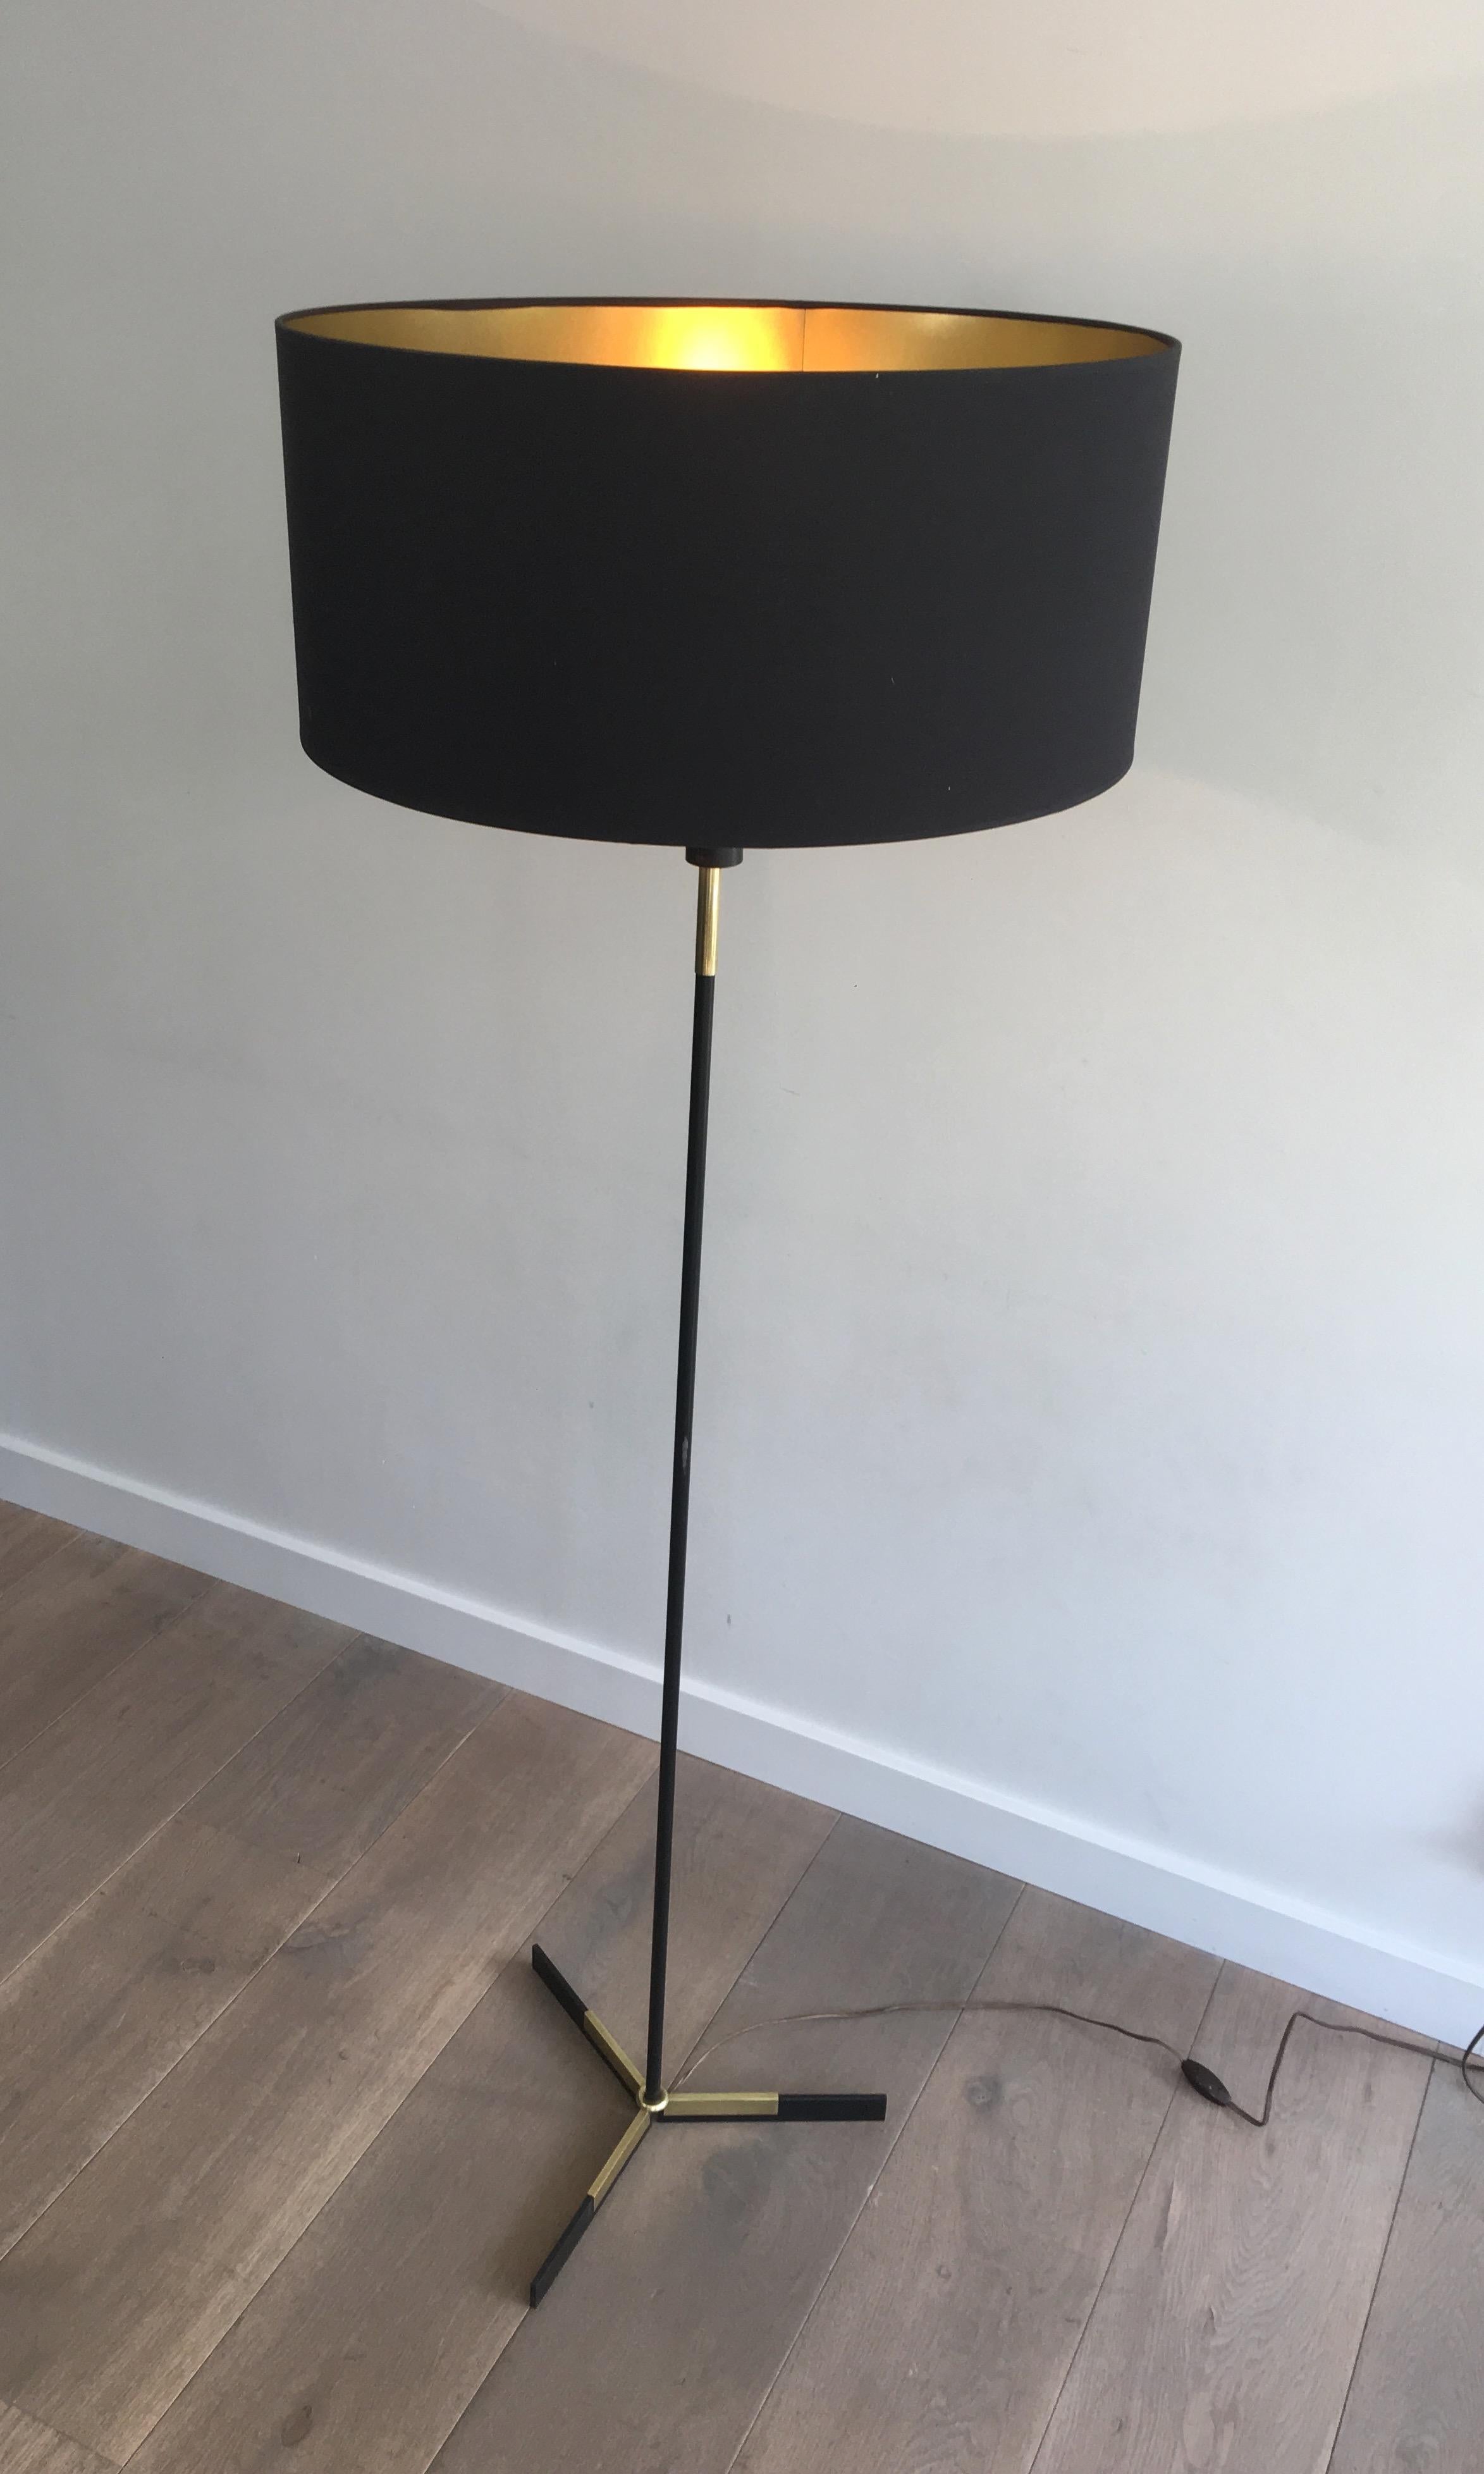 Black Lacquered and Brass Design Floor Lamp, French, circa 1950 For Sale 6